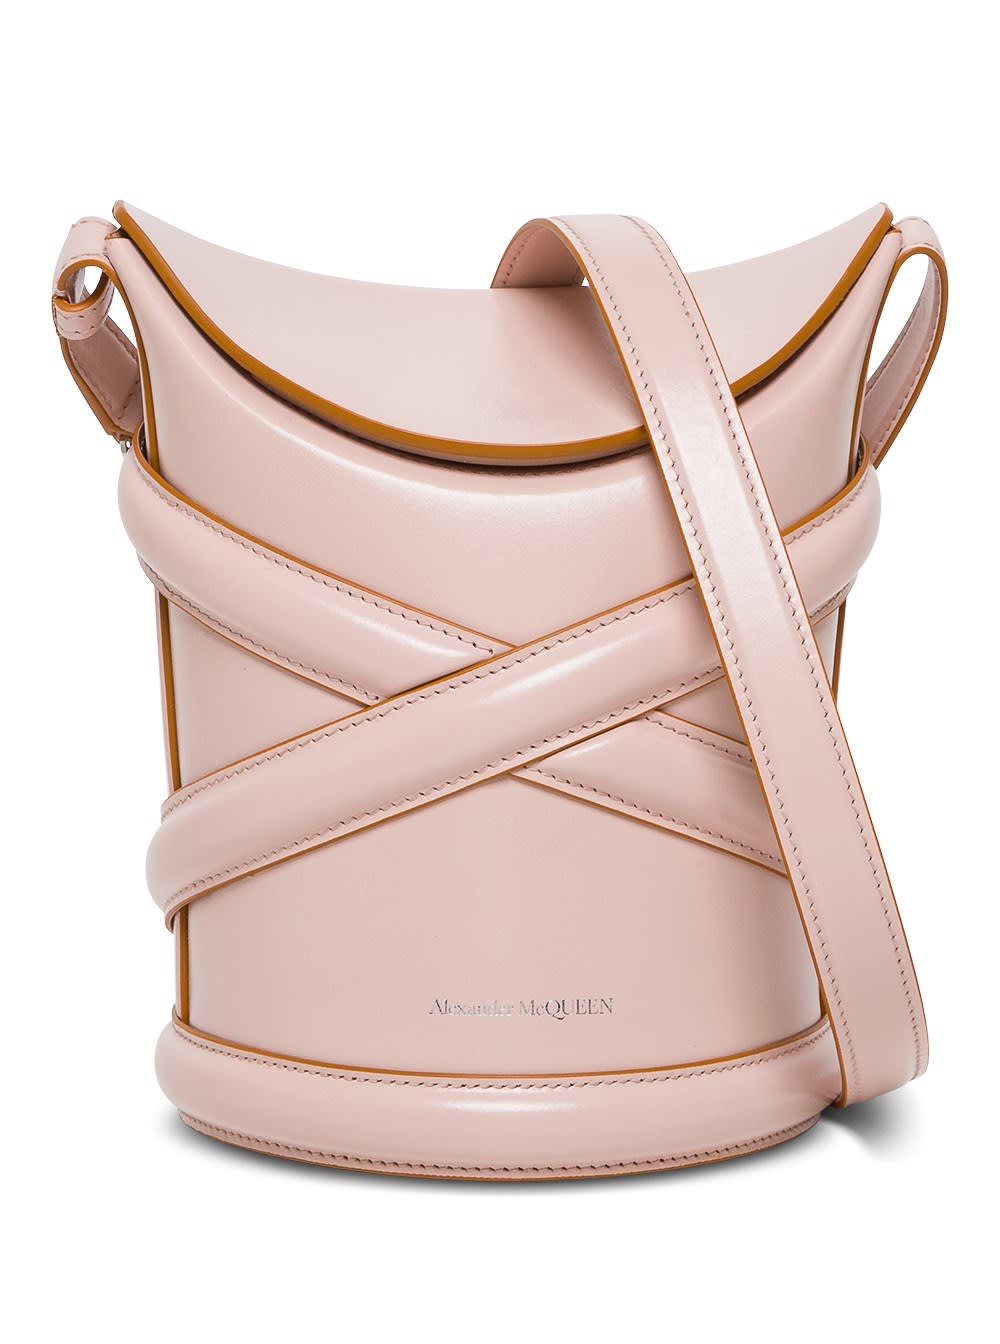 Alexander McQueen The Curve Crossbody Bag In Pink Leather